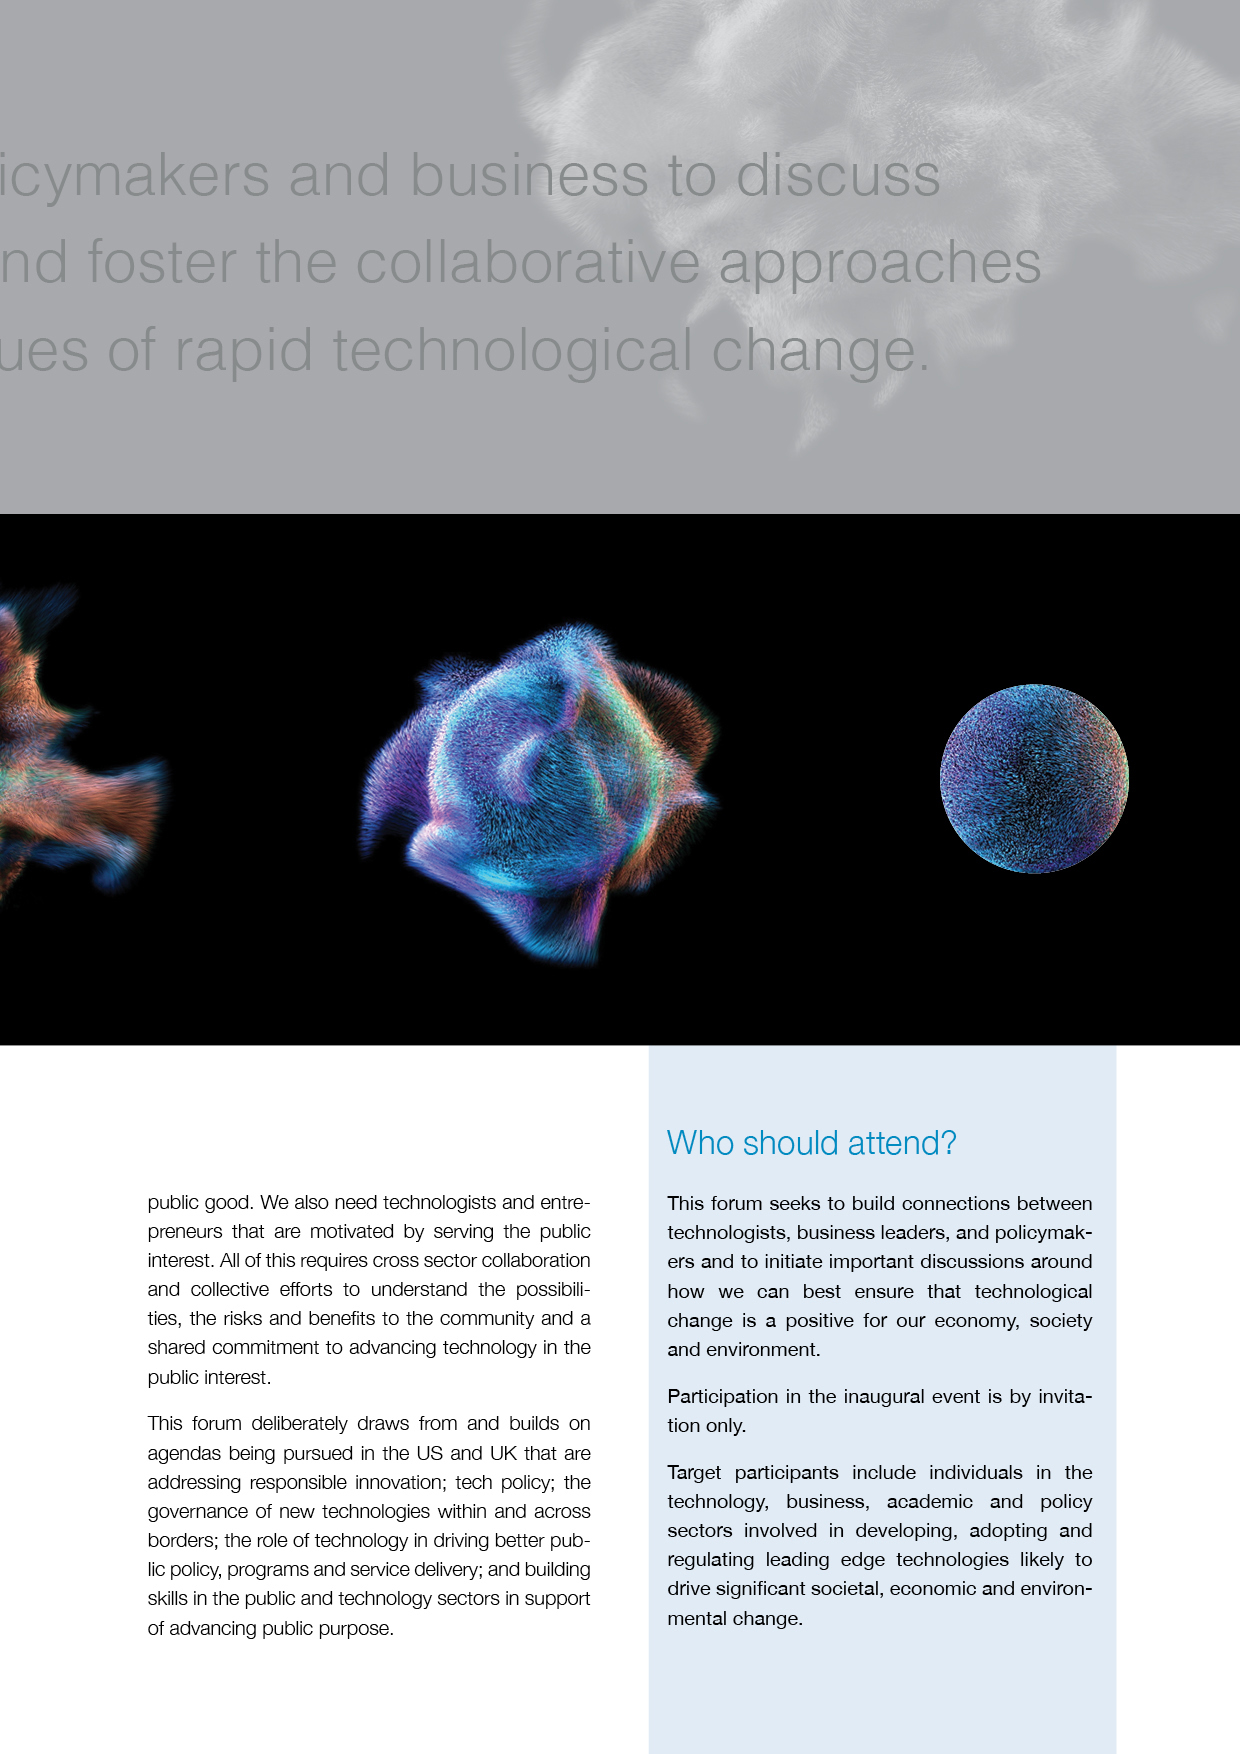 Tech conference brochure